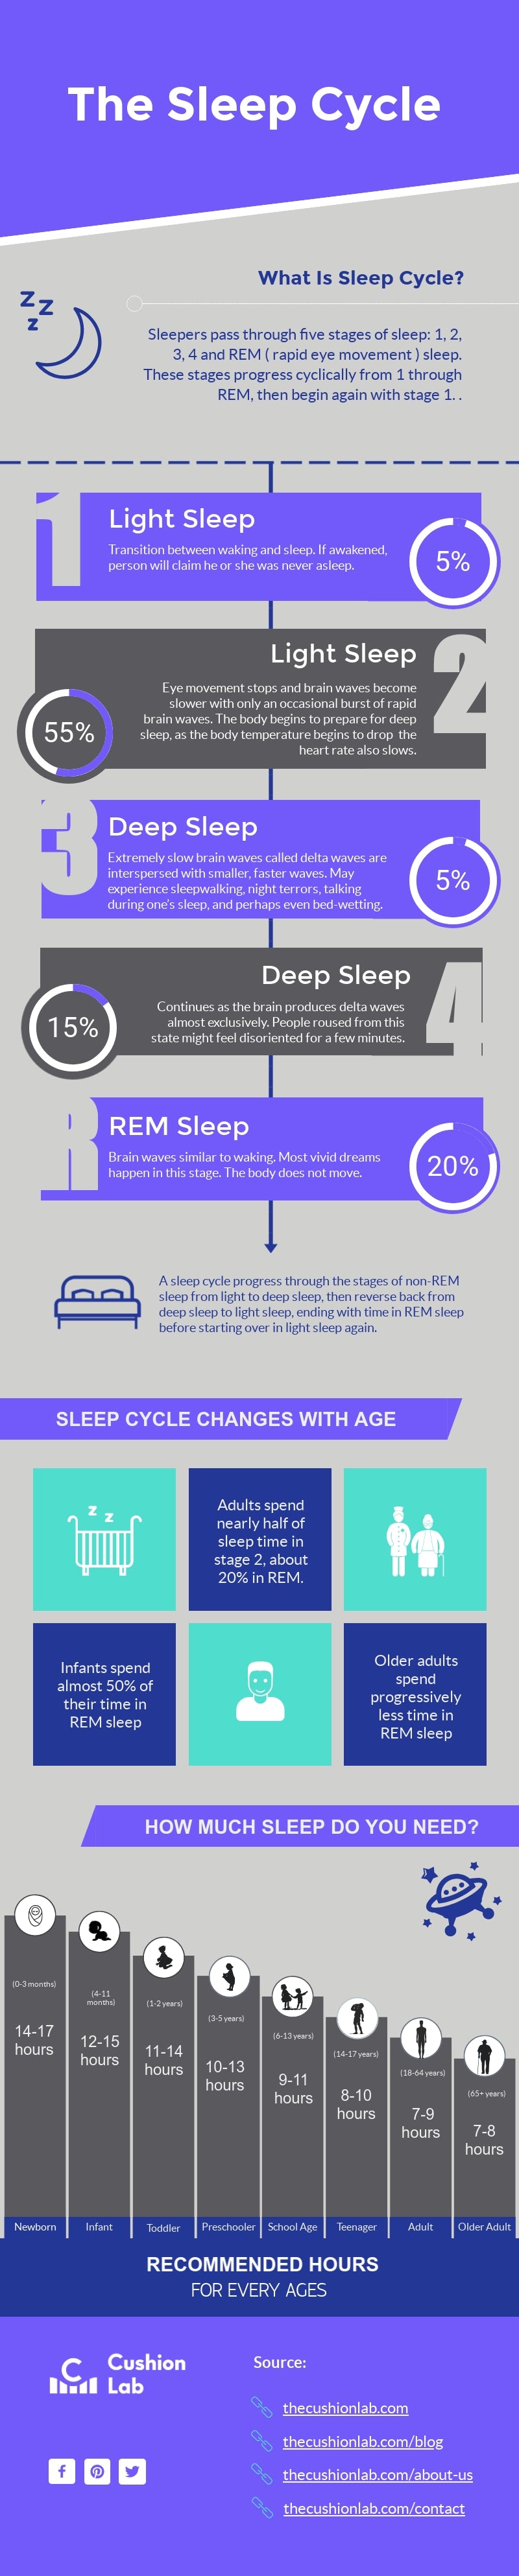 sleep cycle stages and recommended sleep hours for different age